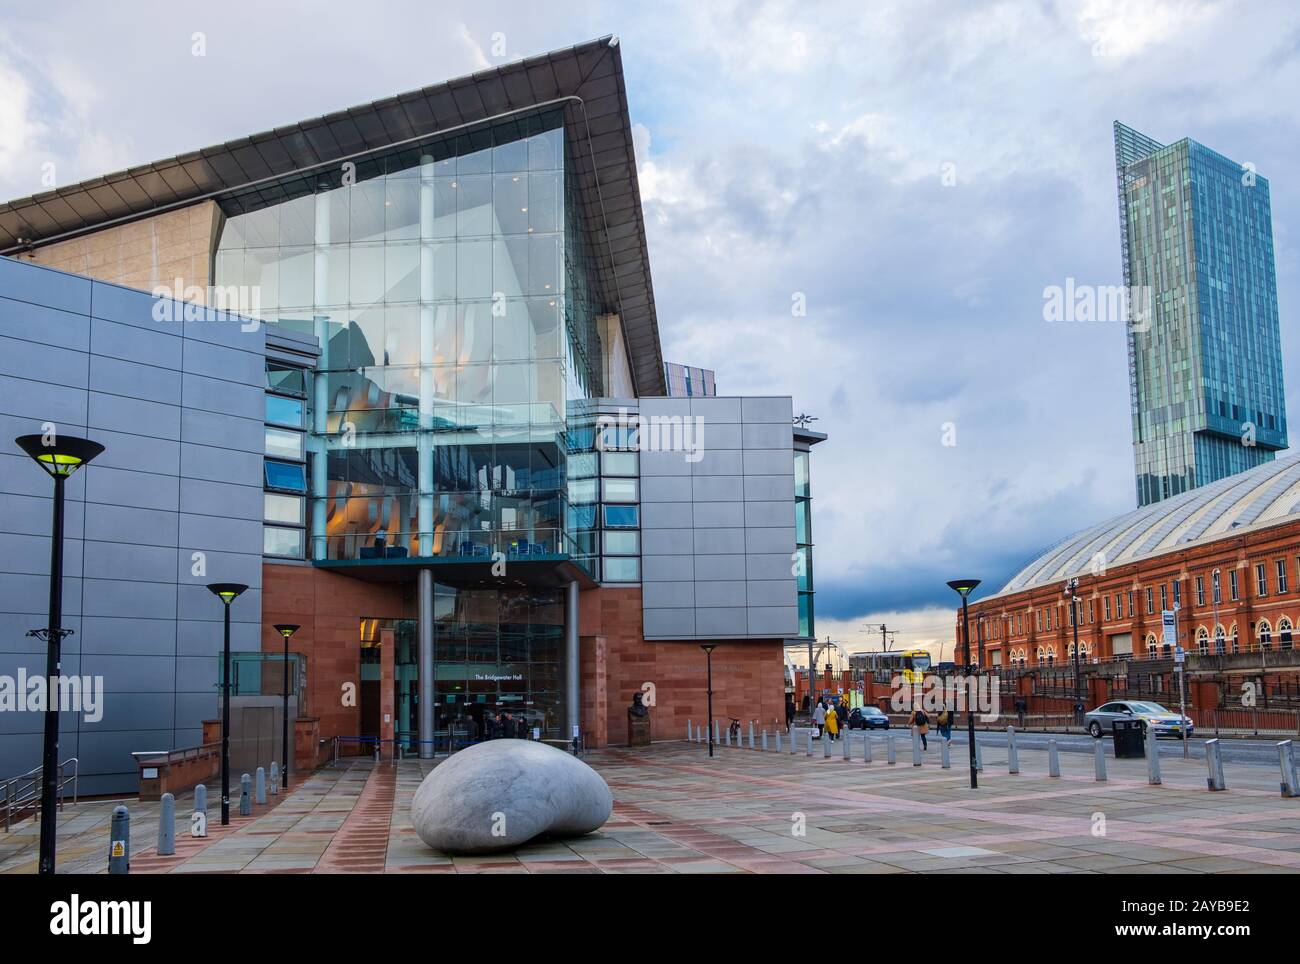 The Bridgewater Hall facing the Manchester Central Conference Centre. The Bridgewater Hall is an international concert venue in Stock Photo